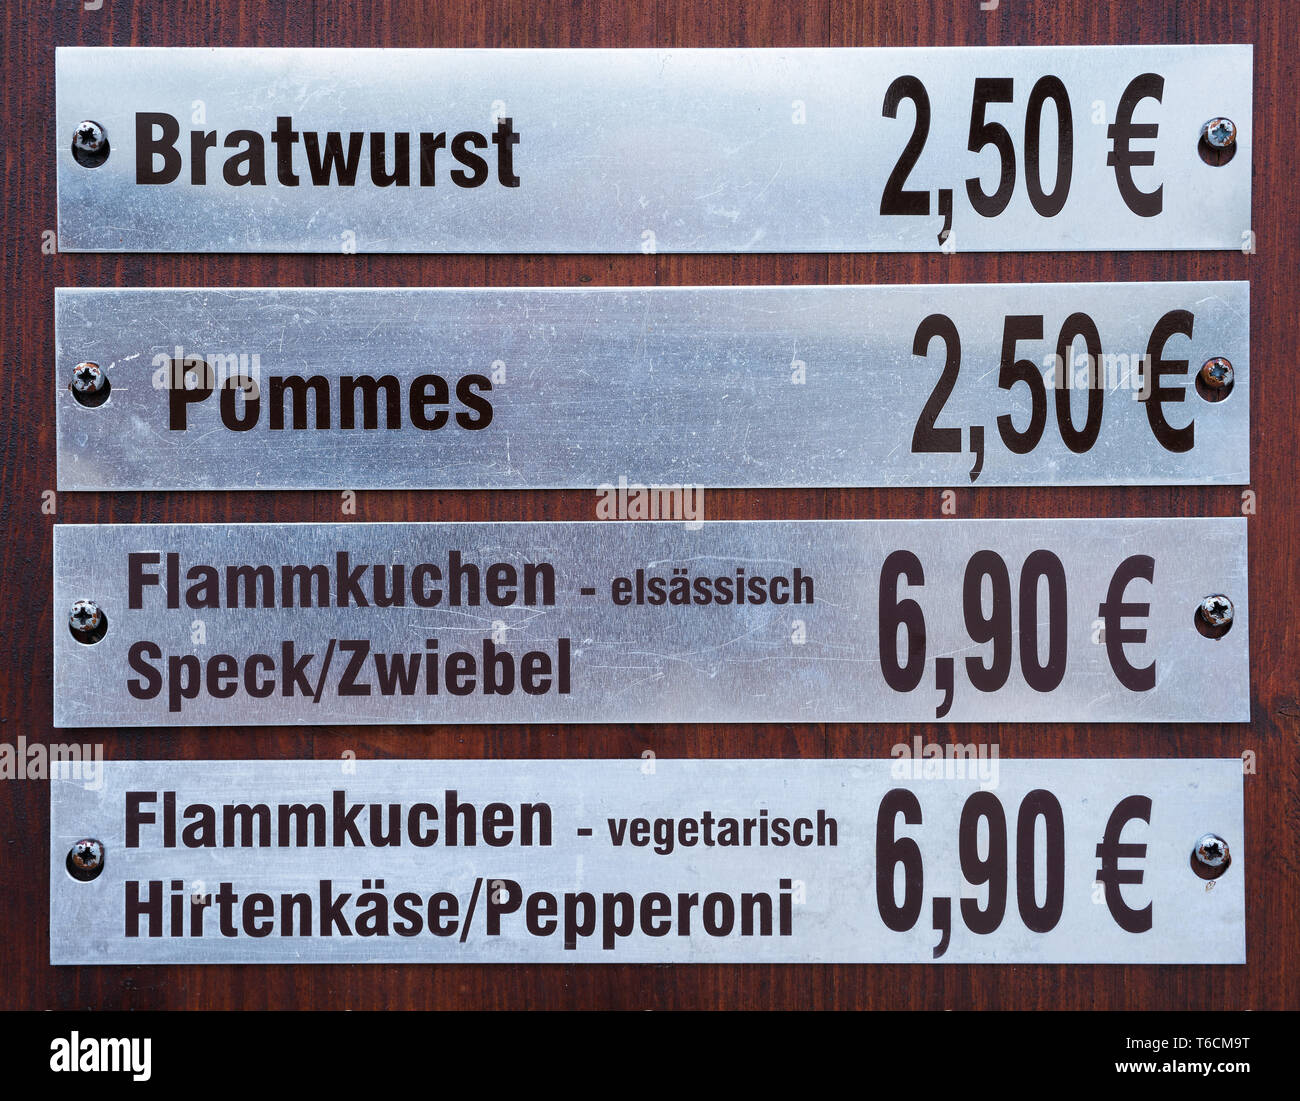 Price tags at a snack bar in Magdeburg Stock Photo